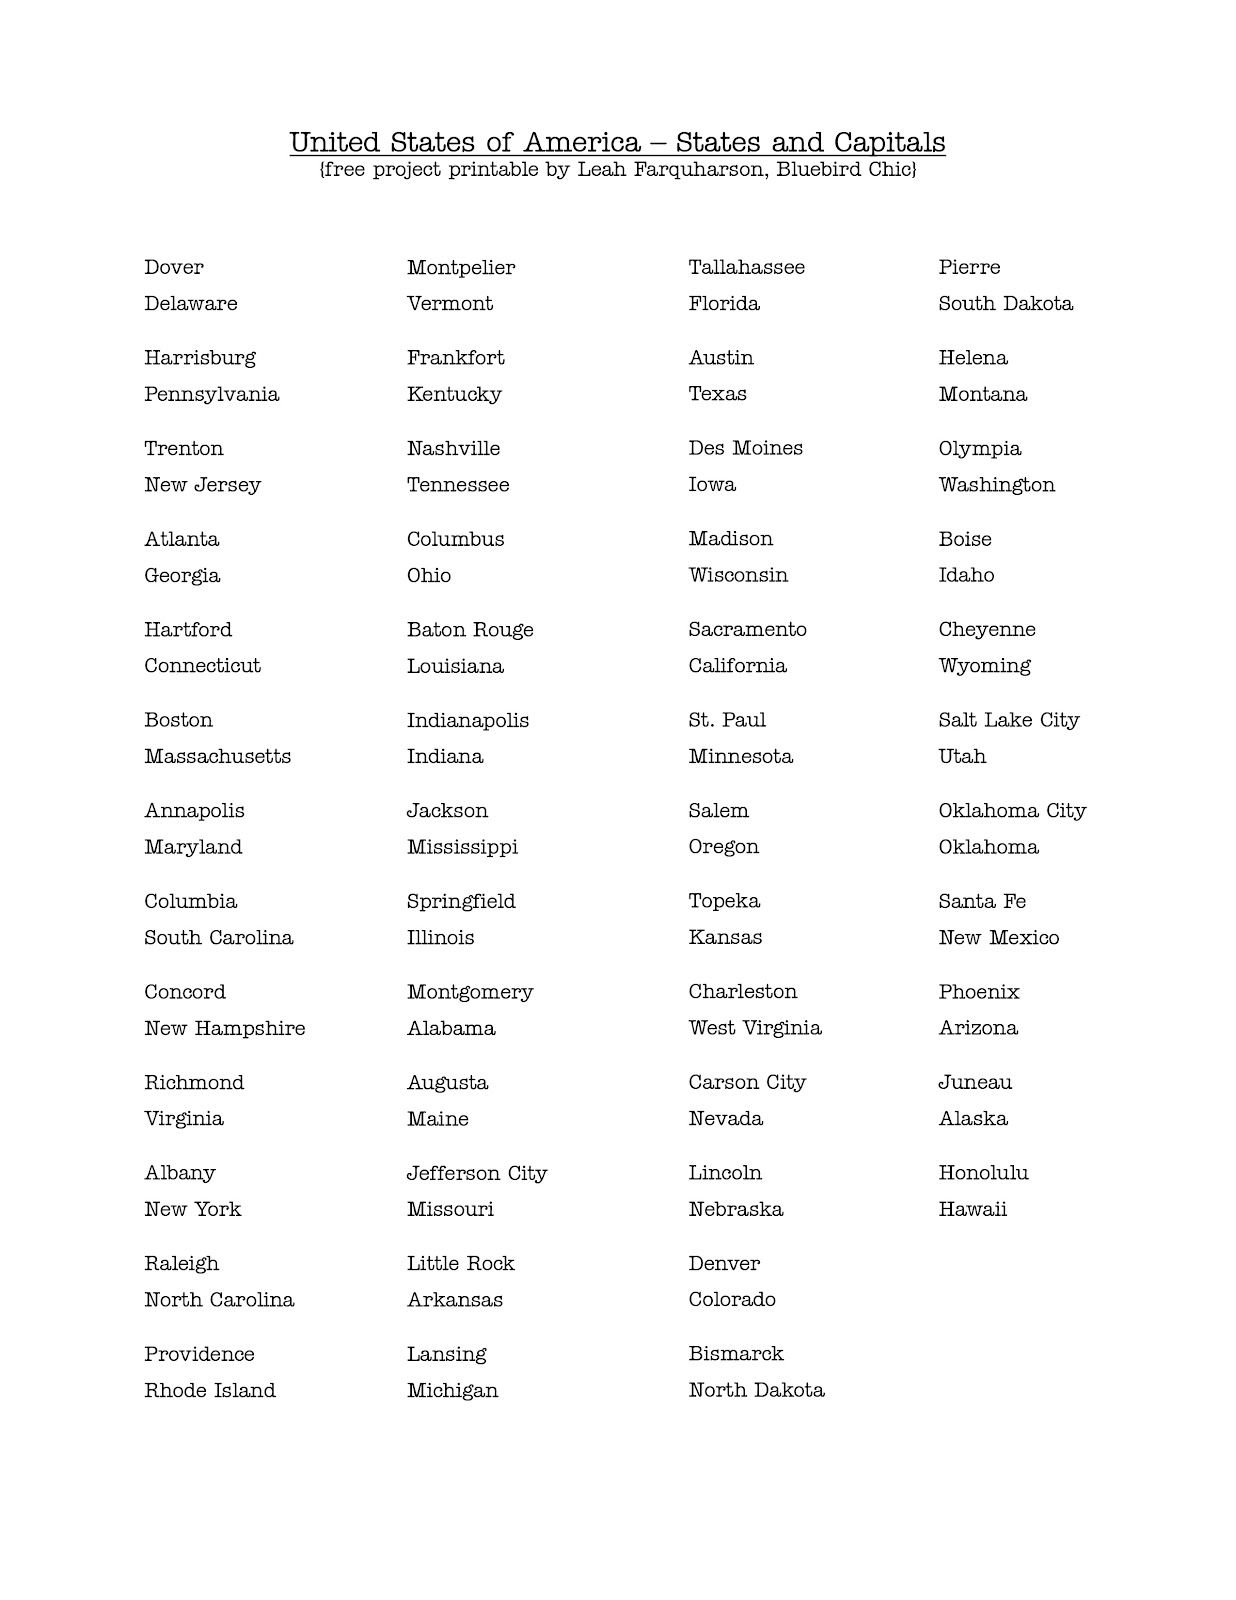 states-and-capitals-list-printable-get-your-hands-on-amazing-free